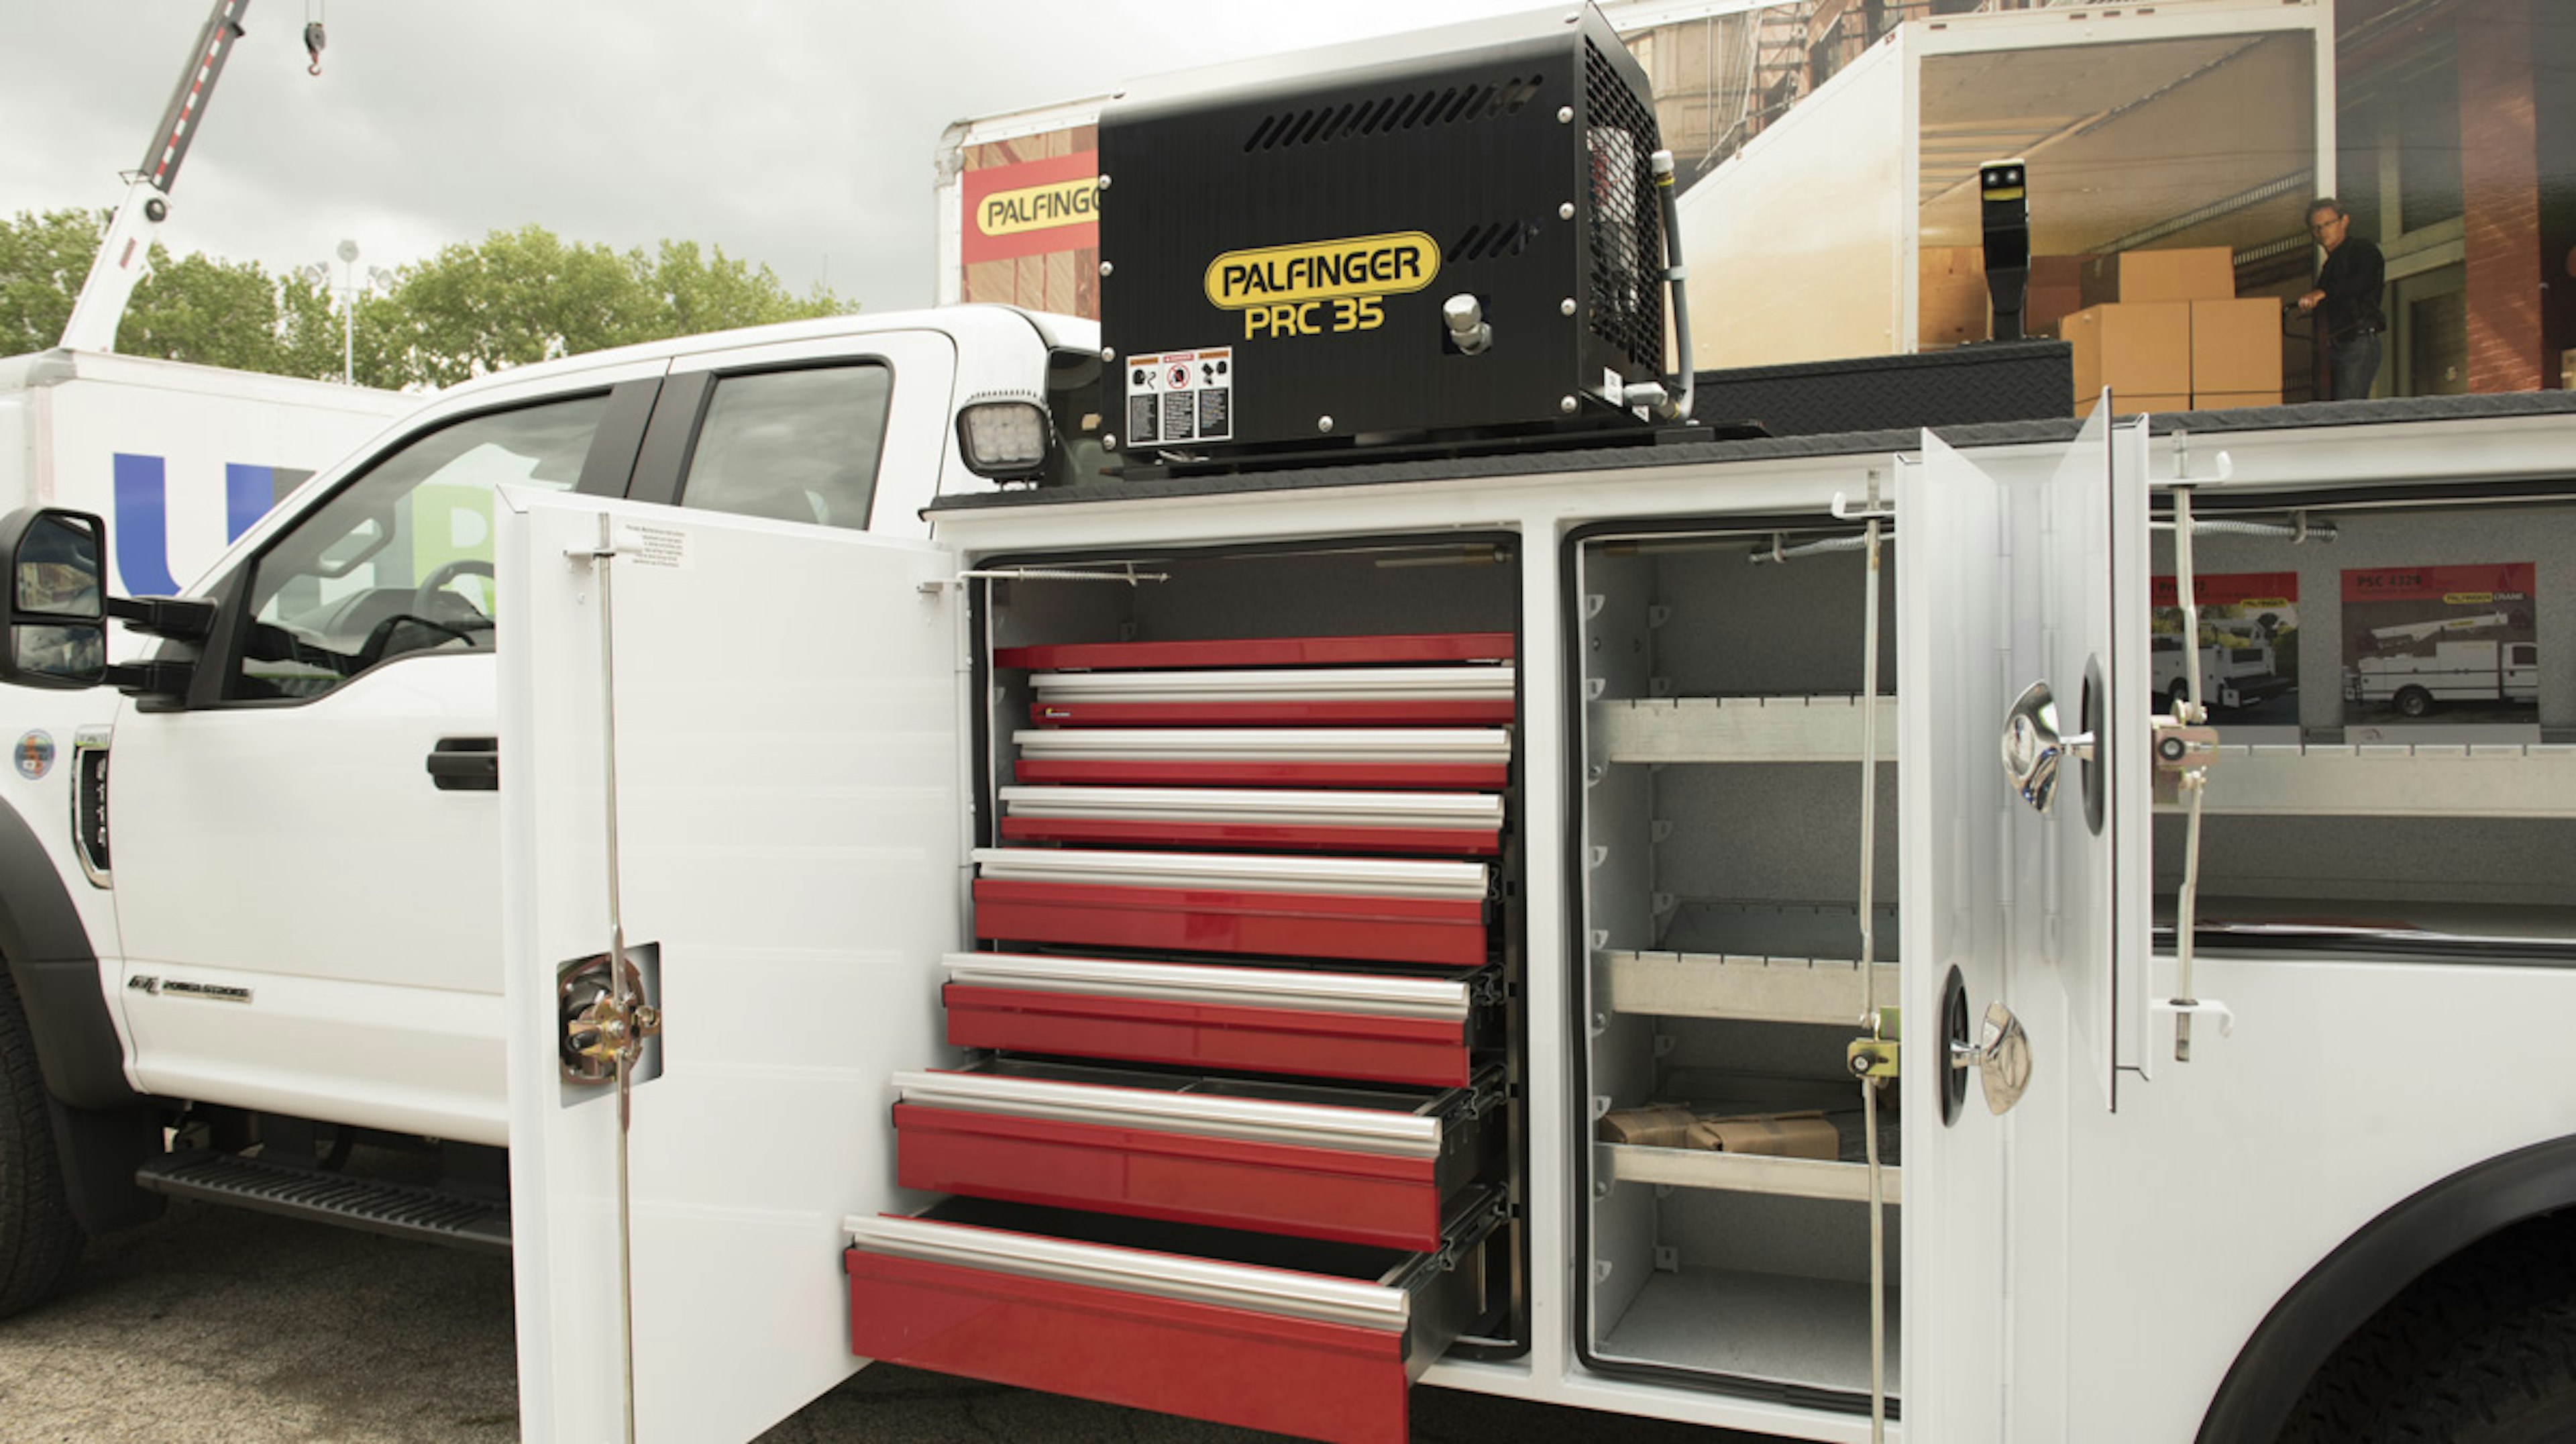 utility accessories such as tool boxes and generator on the back of a service truck